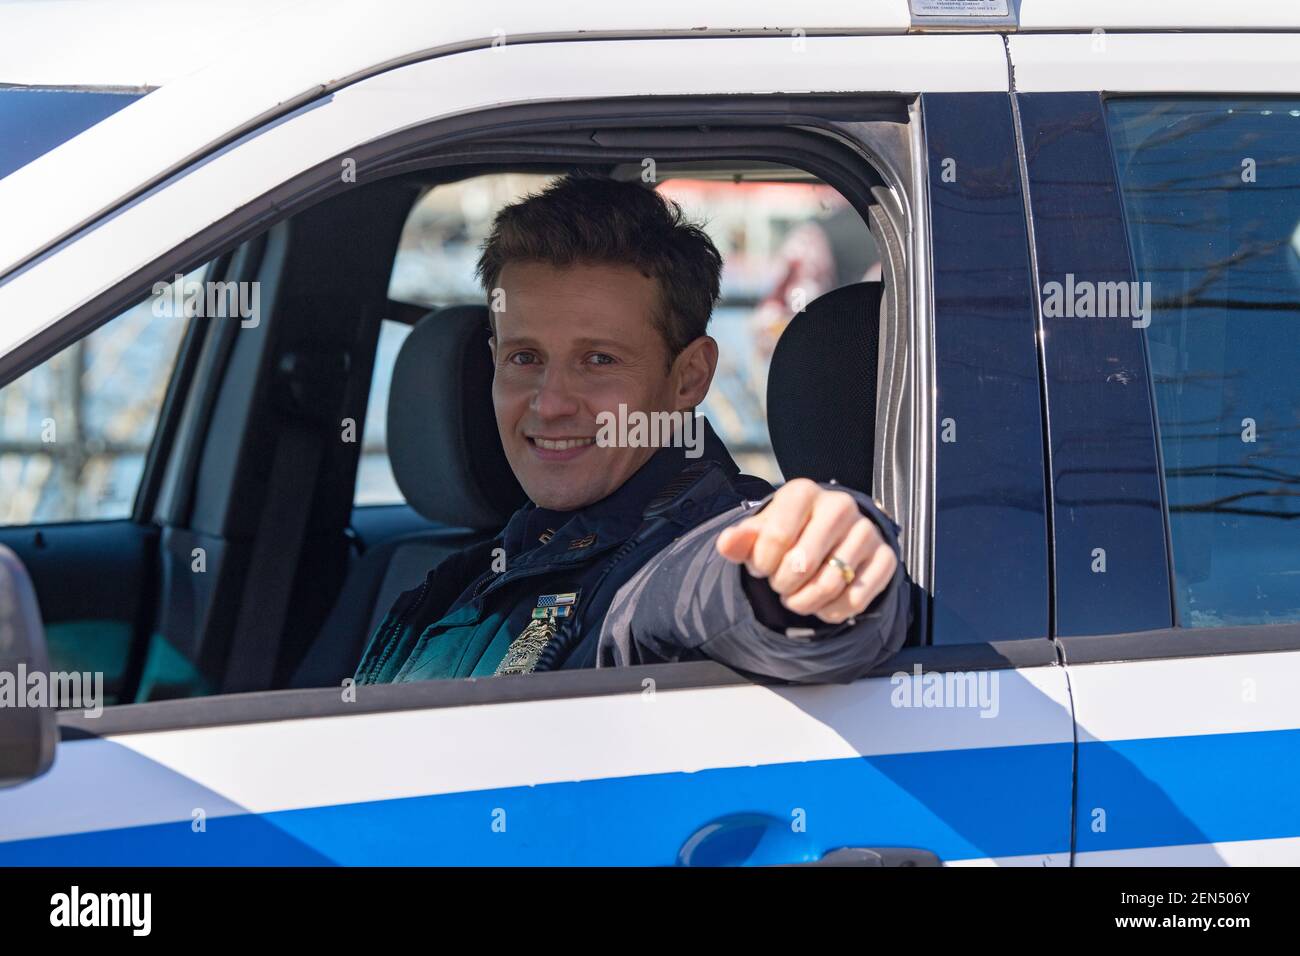 NEW YORK, NY – FEBRUARY 25: Will Estes is seen on a film production trailer during the filming of the television show 'Blue Bloods' season eleven in Astoria Park on February 25, 2021 in New York City. Credit: Ron Adar/Alamy Live News Stock Photo